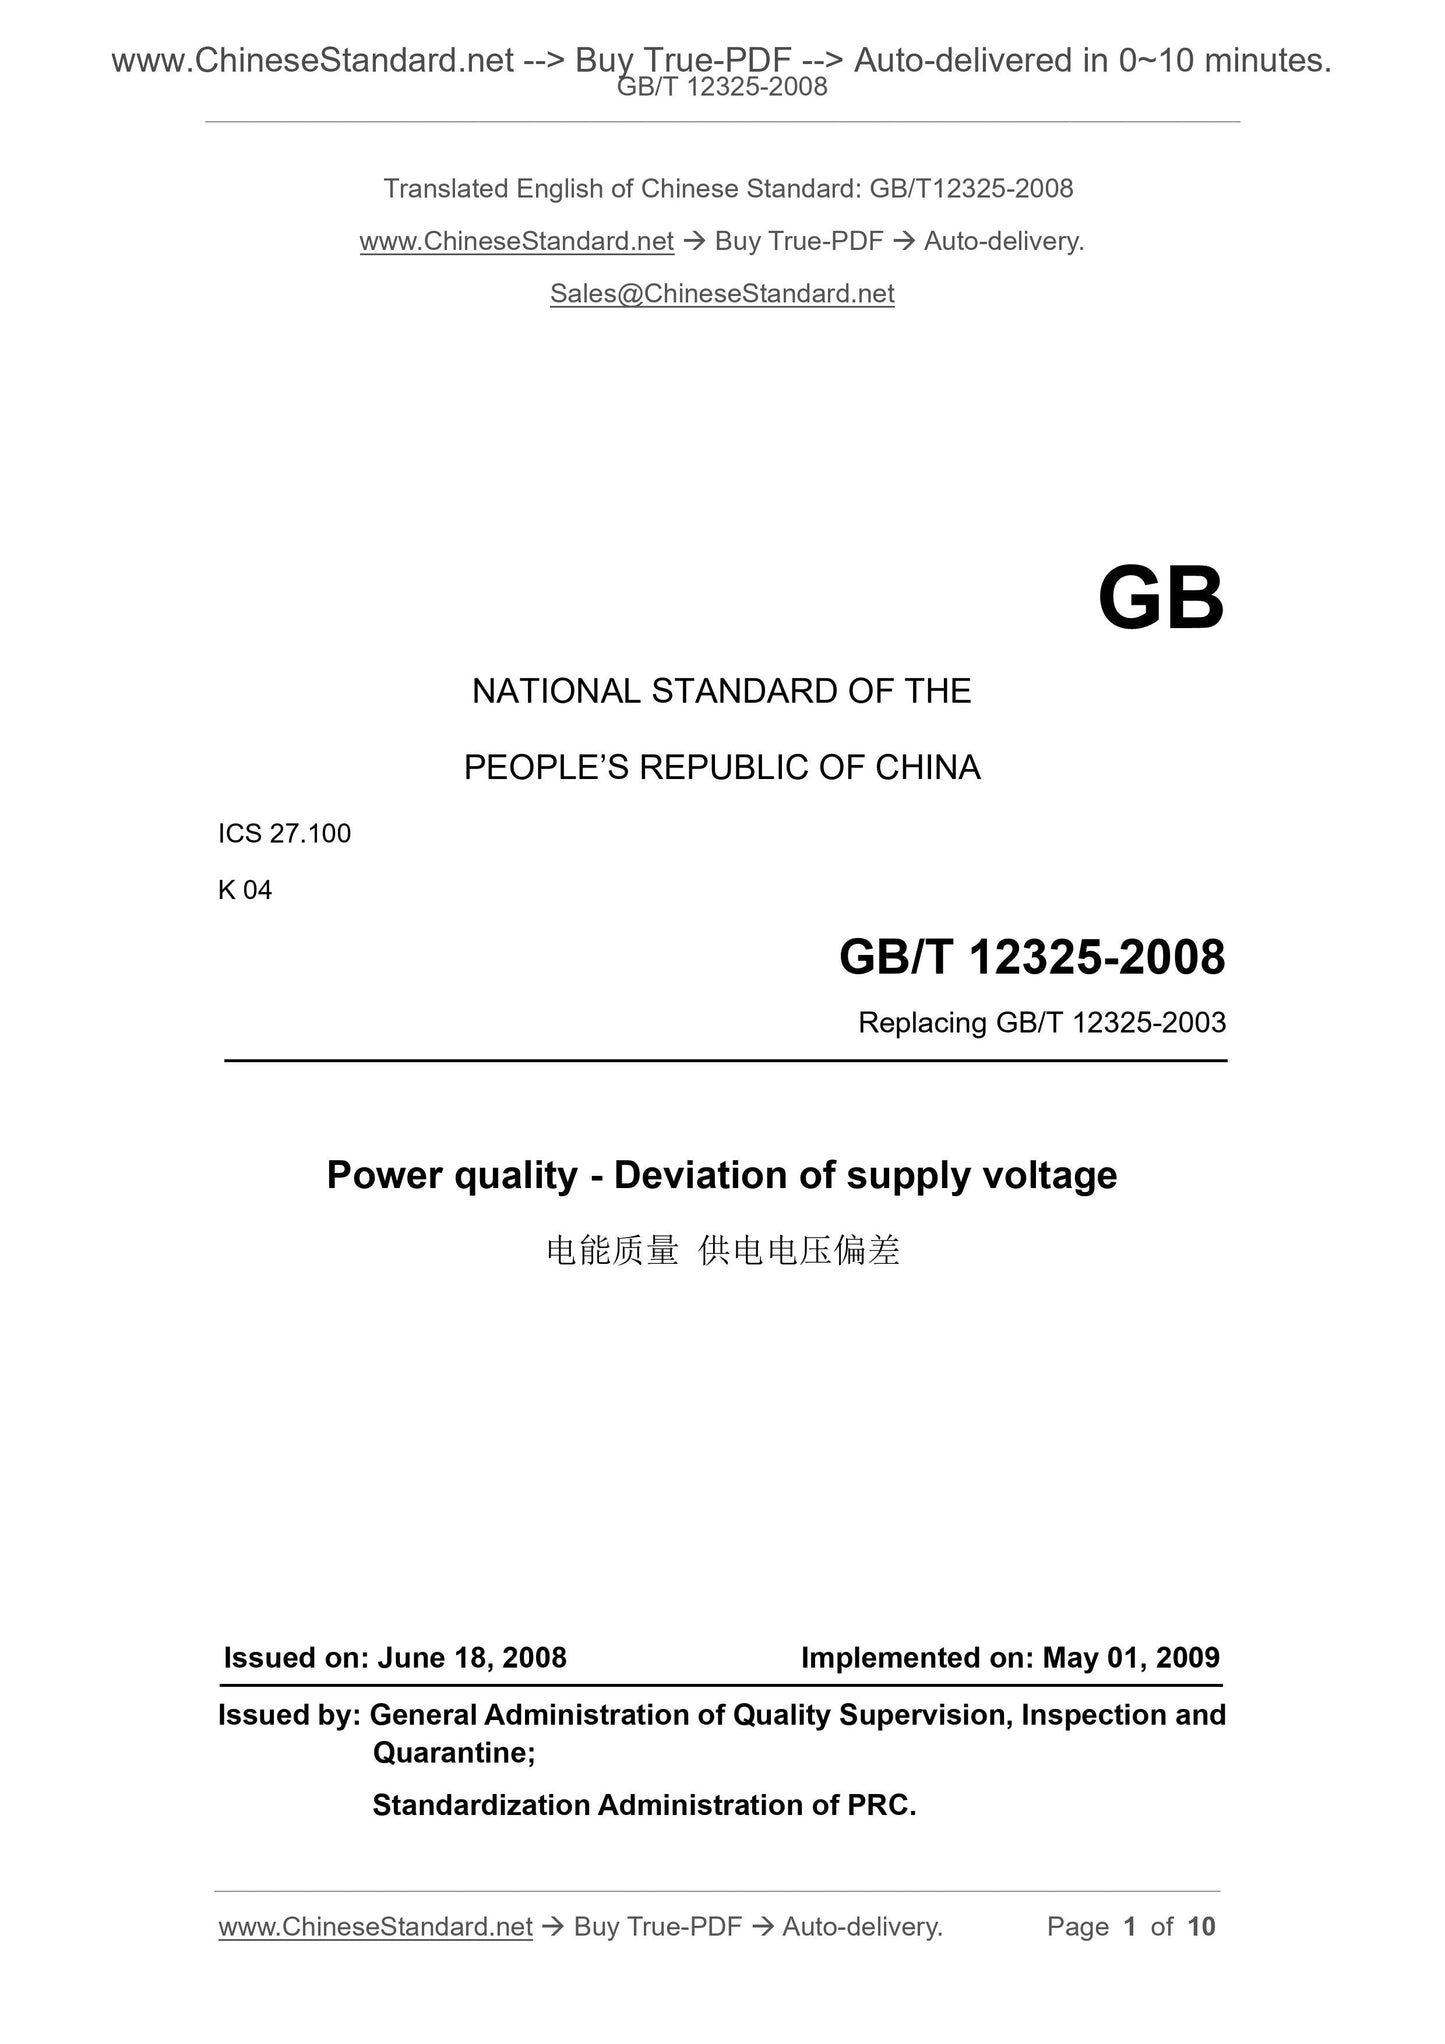 GB/T 12325-2008 Page 1